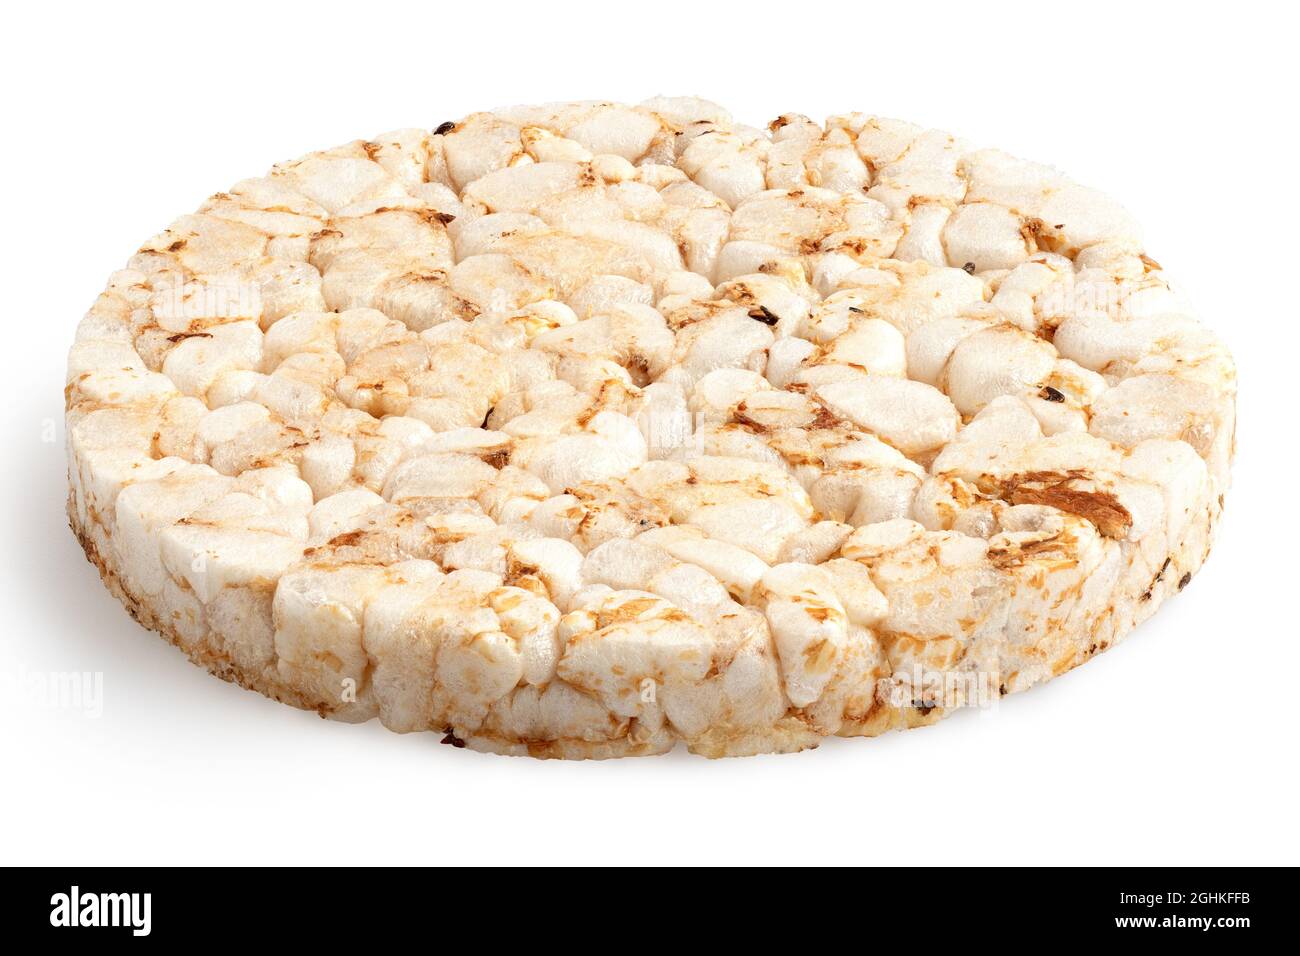 Plain puffed brown rice cake isolated on white. Stock Photo